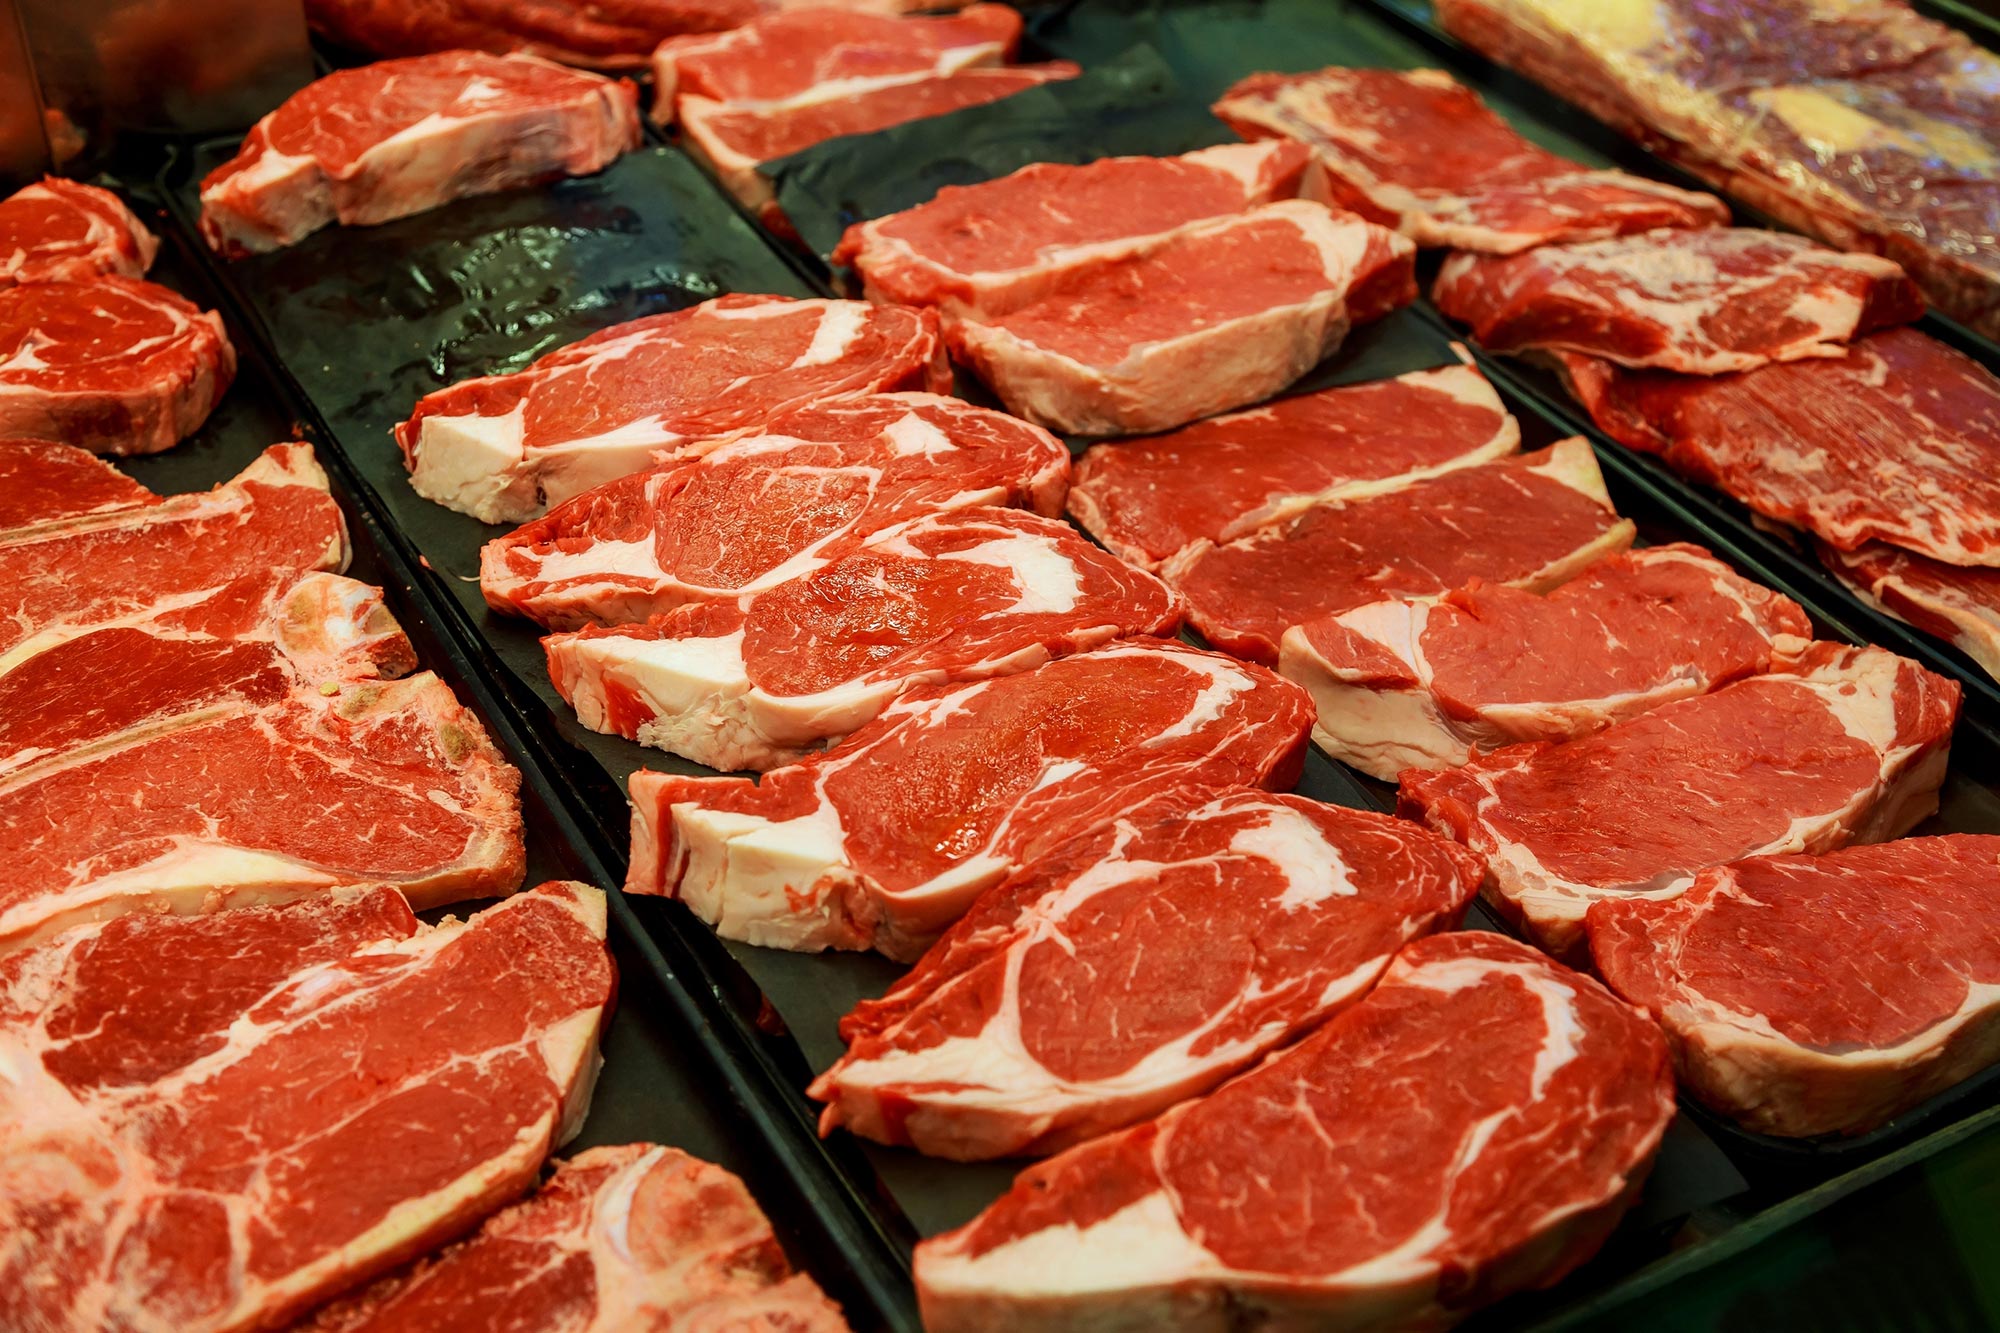 Warning: Study Finds Superbugs Lurking in 40% of Supermarket Meat